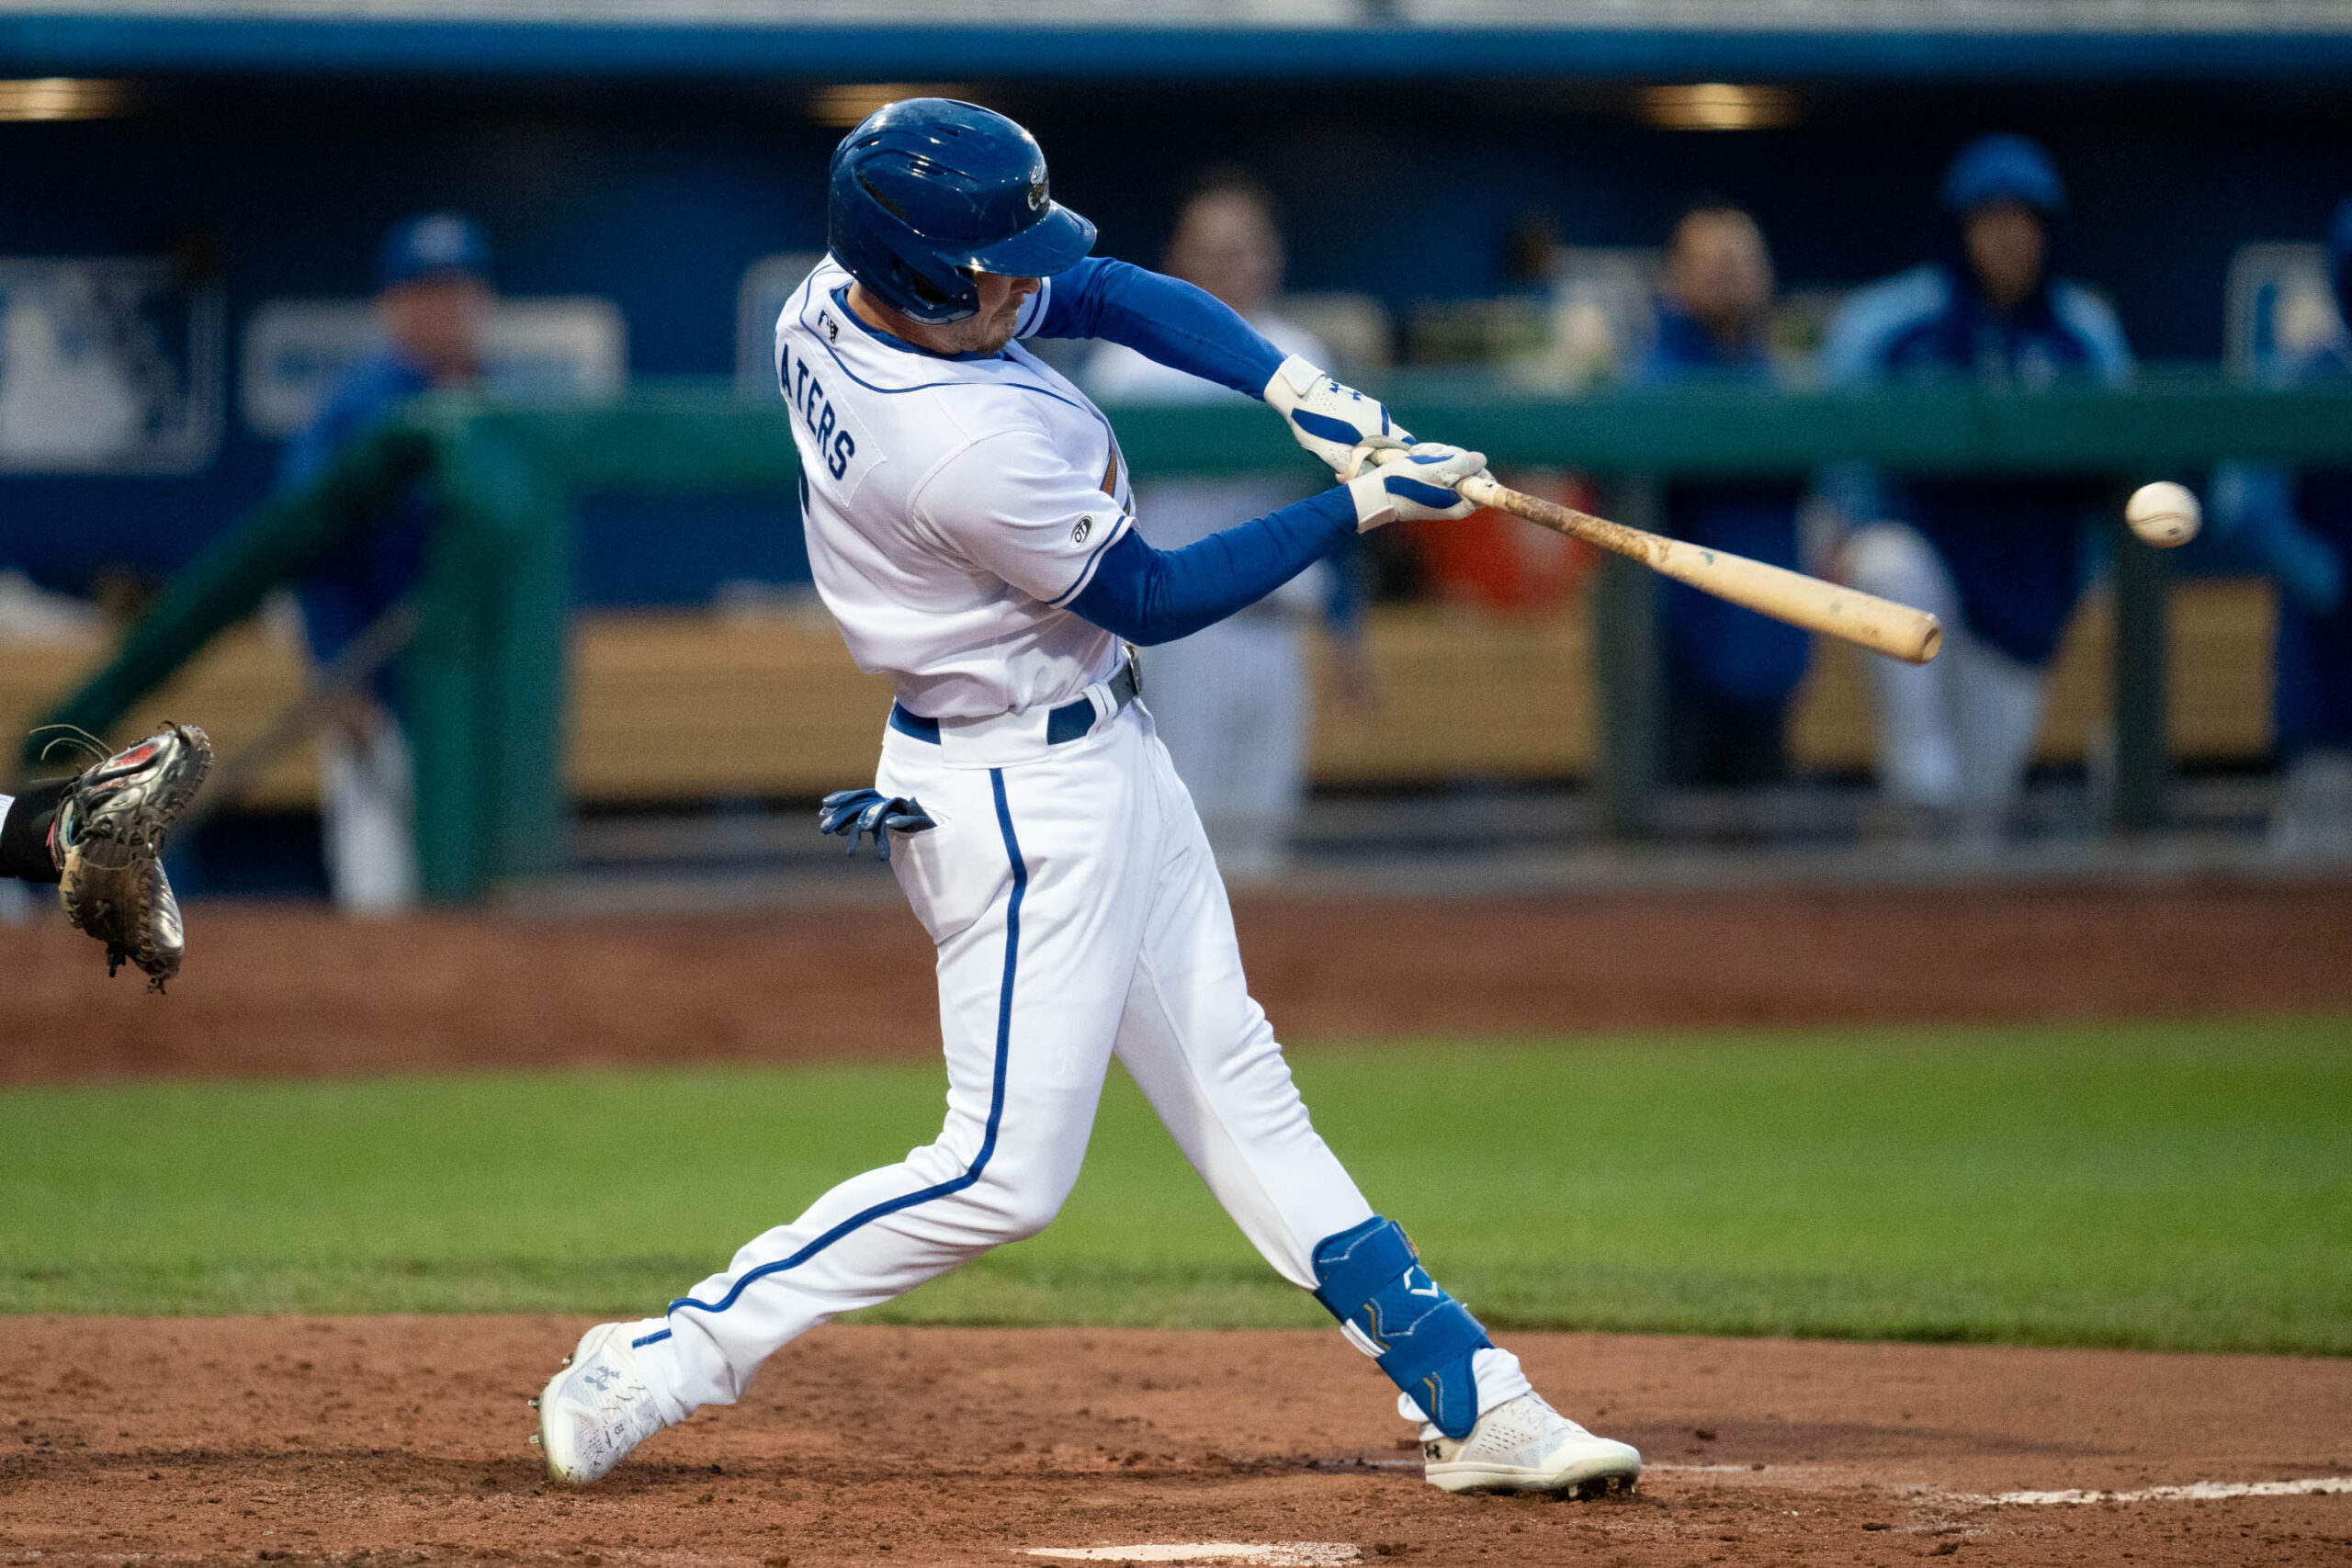 Storm Chasers’ inconsistency leads to 2-4 week